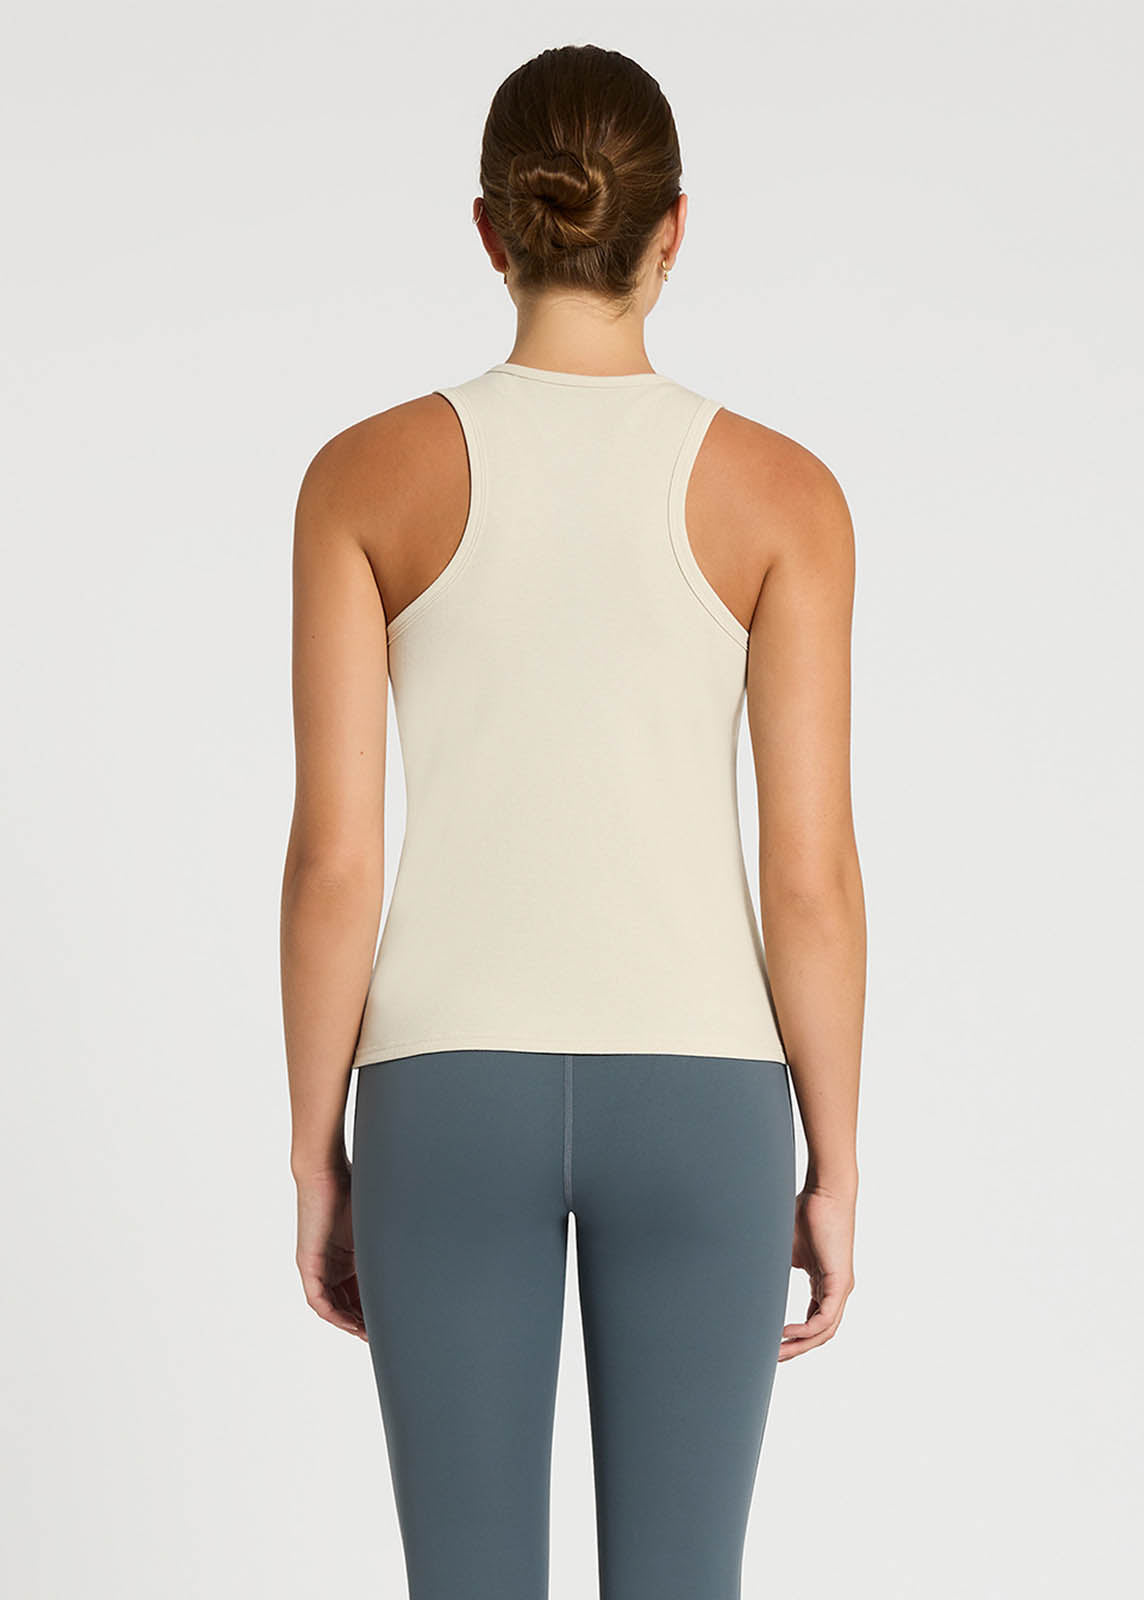 Activewear Tops  Workout Tops For Women